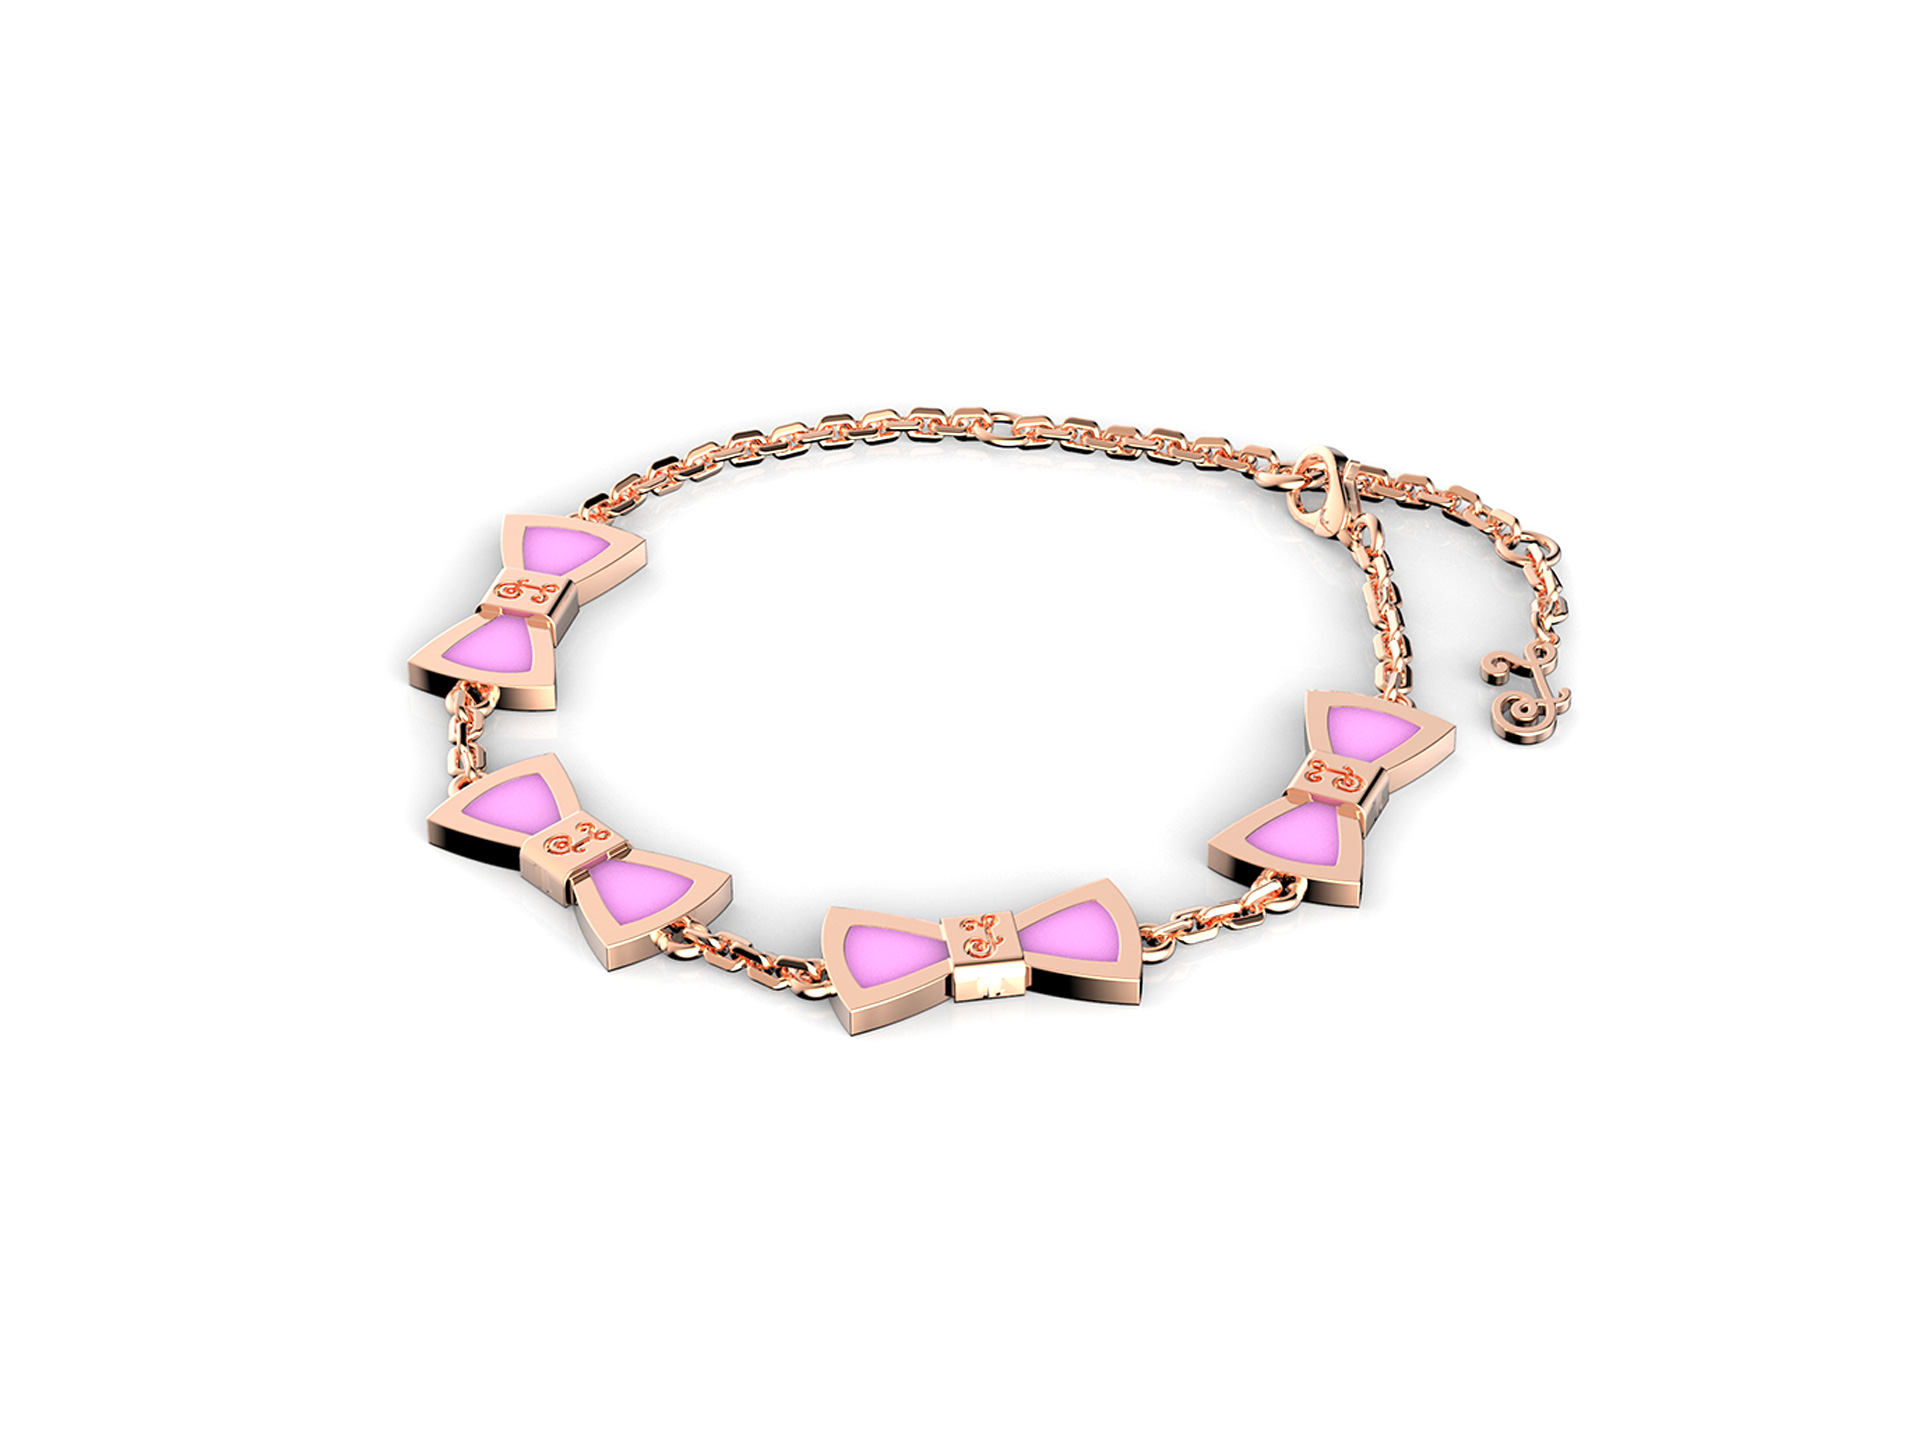 Jewelry Bracelet Hd Transparent, Gold Bracelets Jewelry With Elegant And  Beautiful Look, Bracelet, Gold Bracelet, Jewelry PNG Image For Free Download